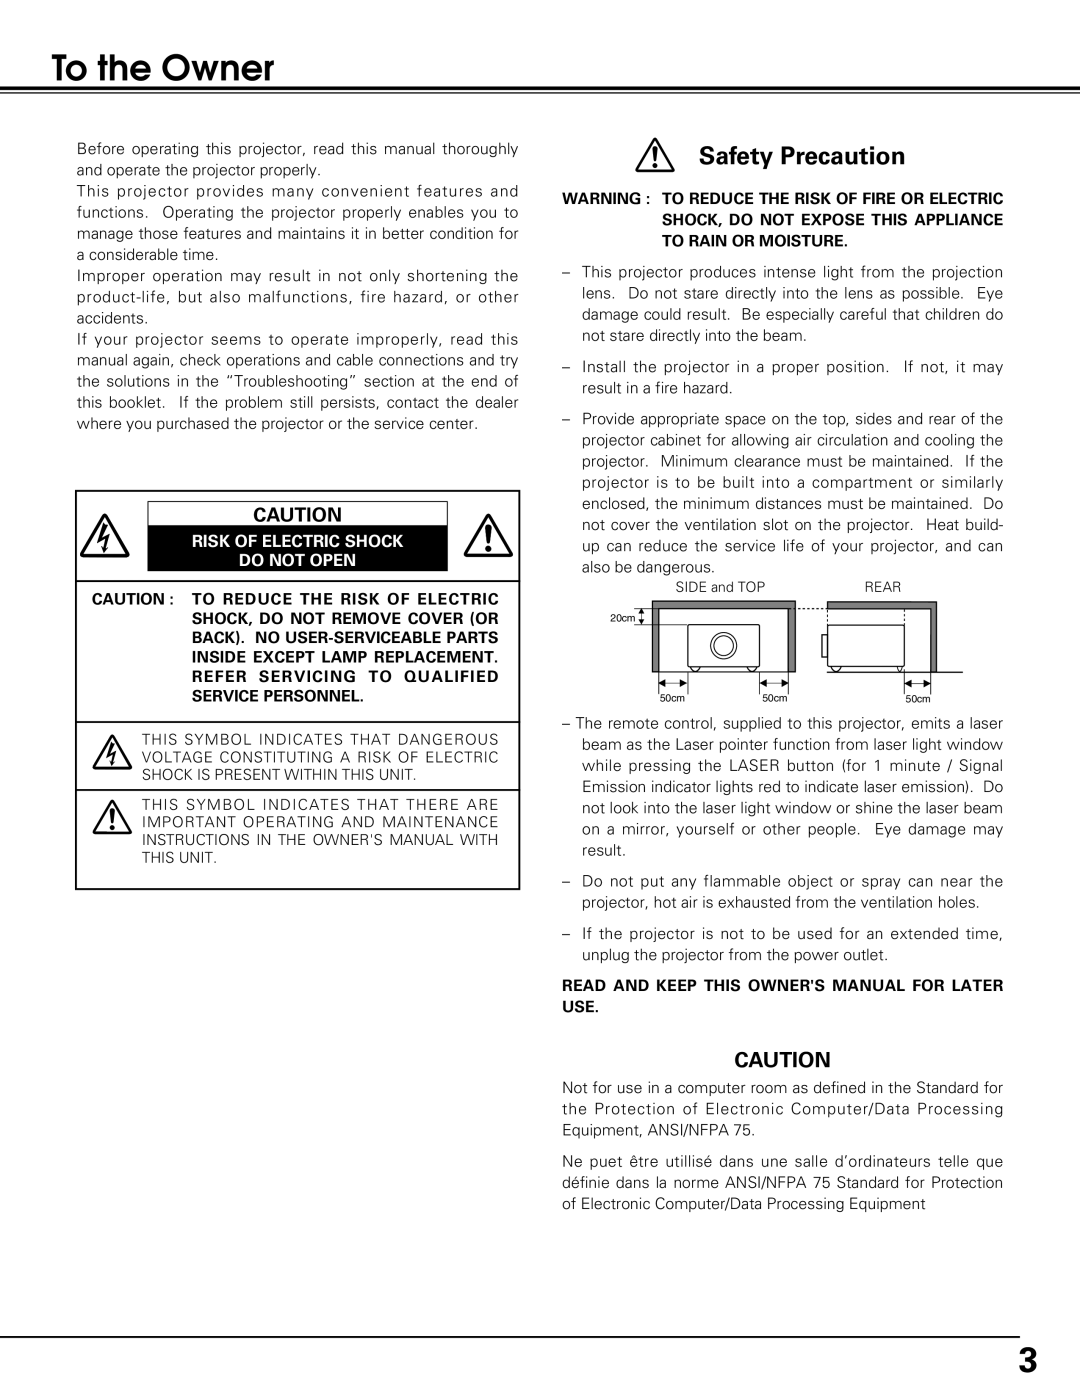 Eiki LC-XE10 instruction manual To the Owner, Safety Precaution, Risk Of Electric Shock Do Not Open 